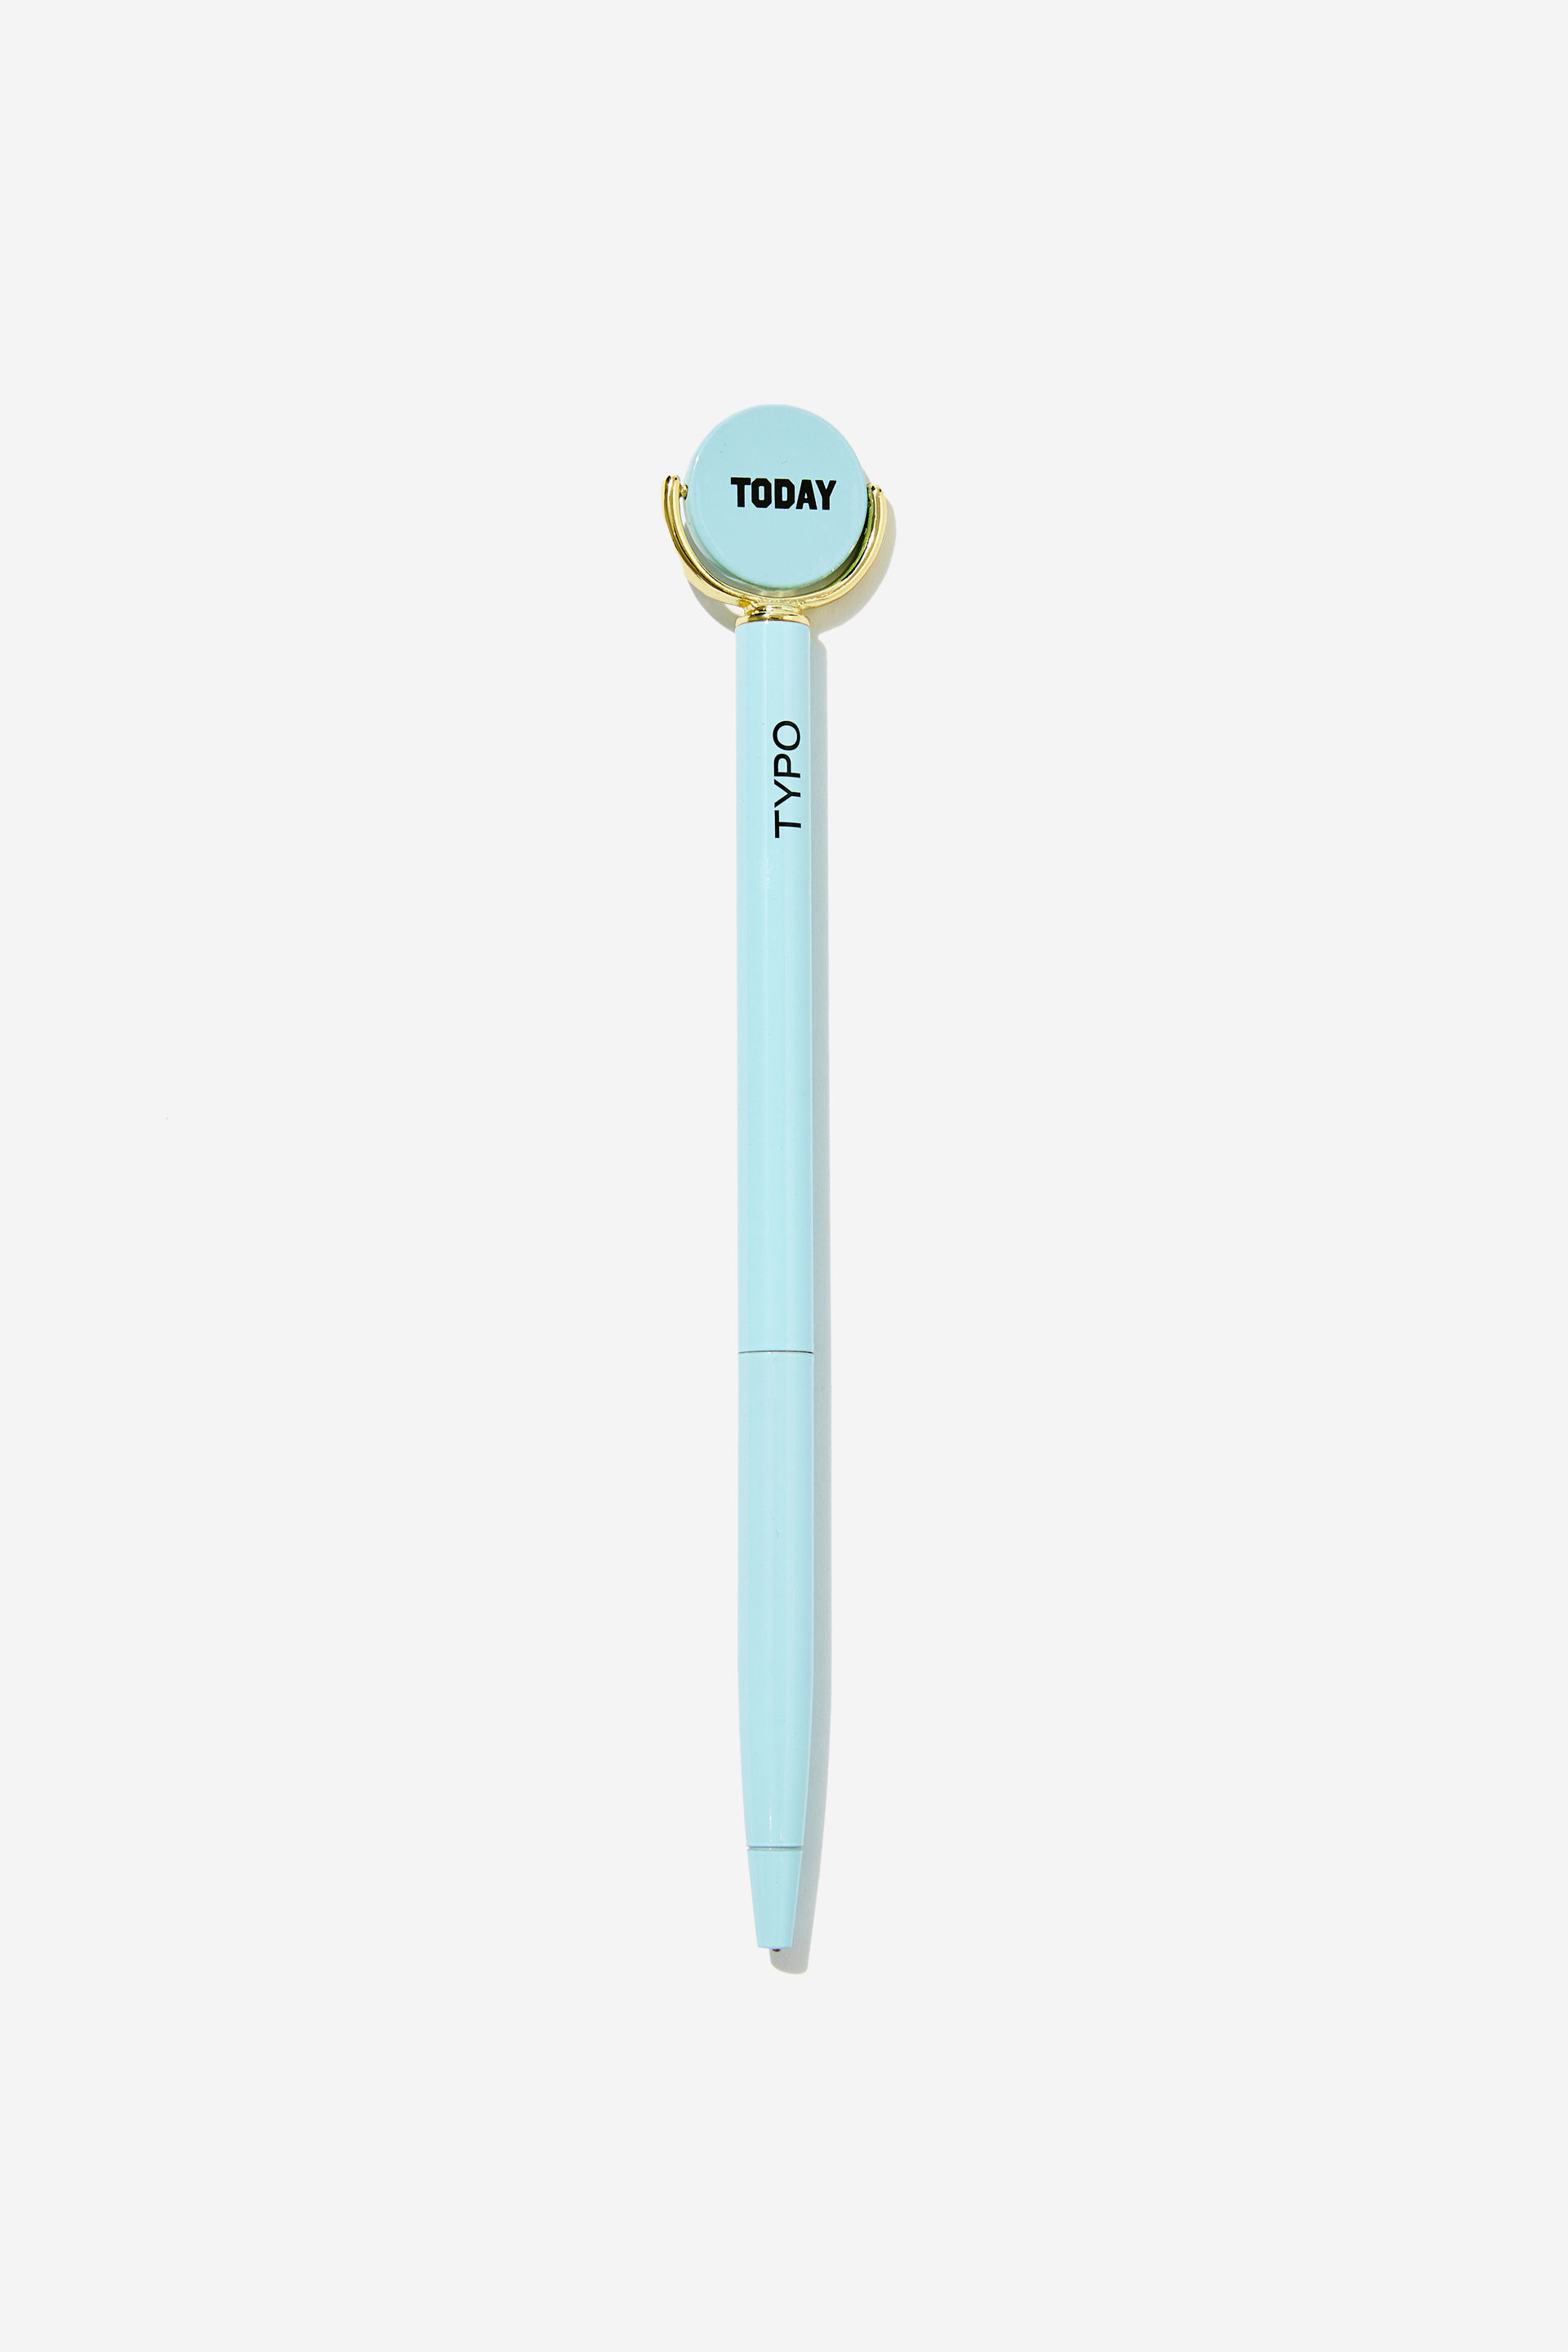 Typo - Spin Top Pen - Blue today tomorrow